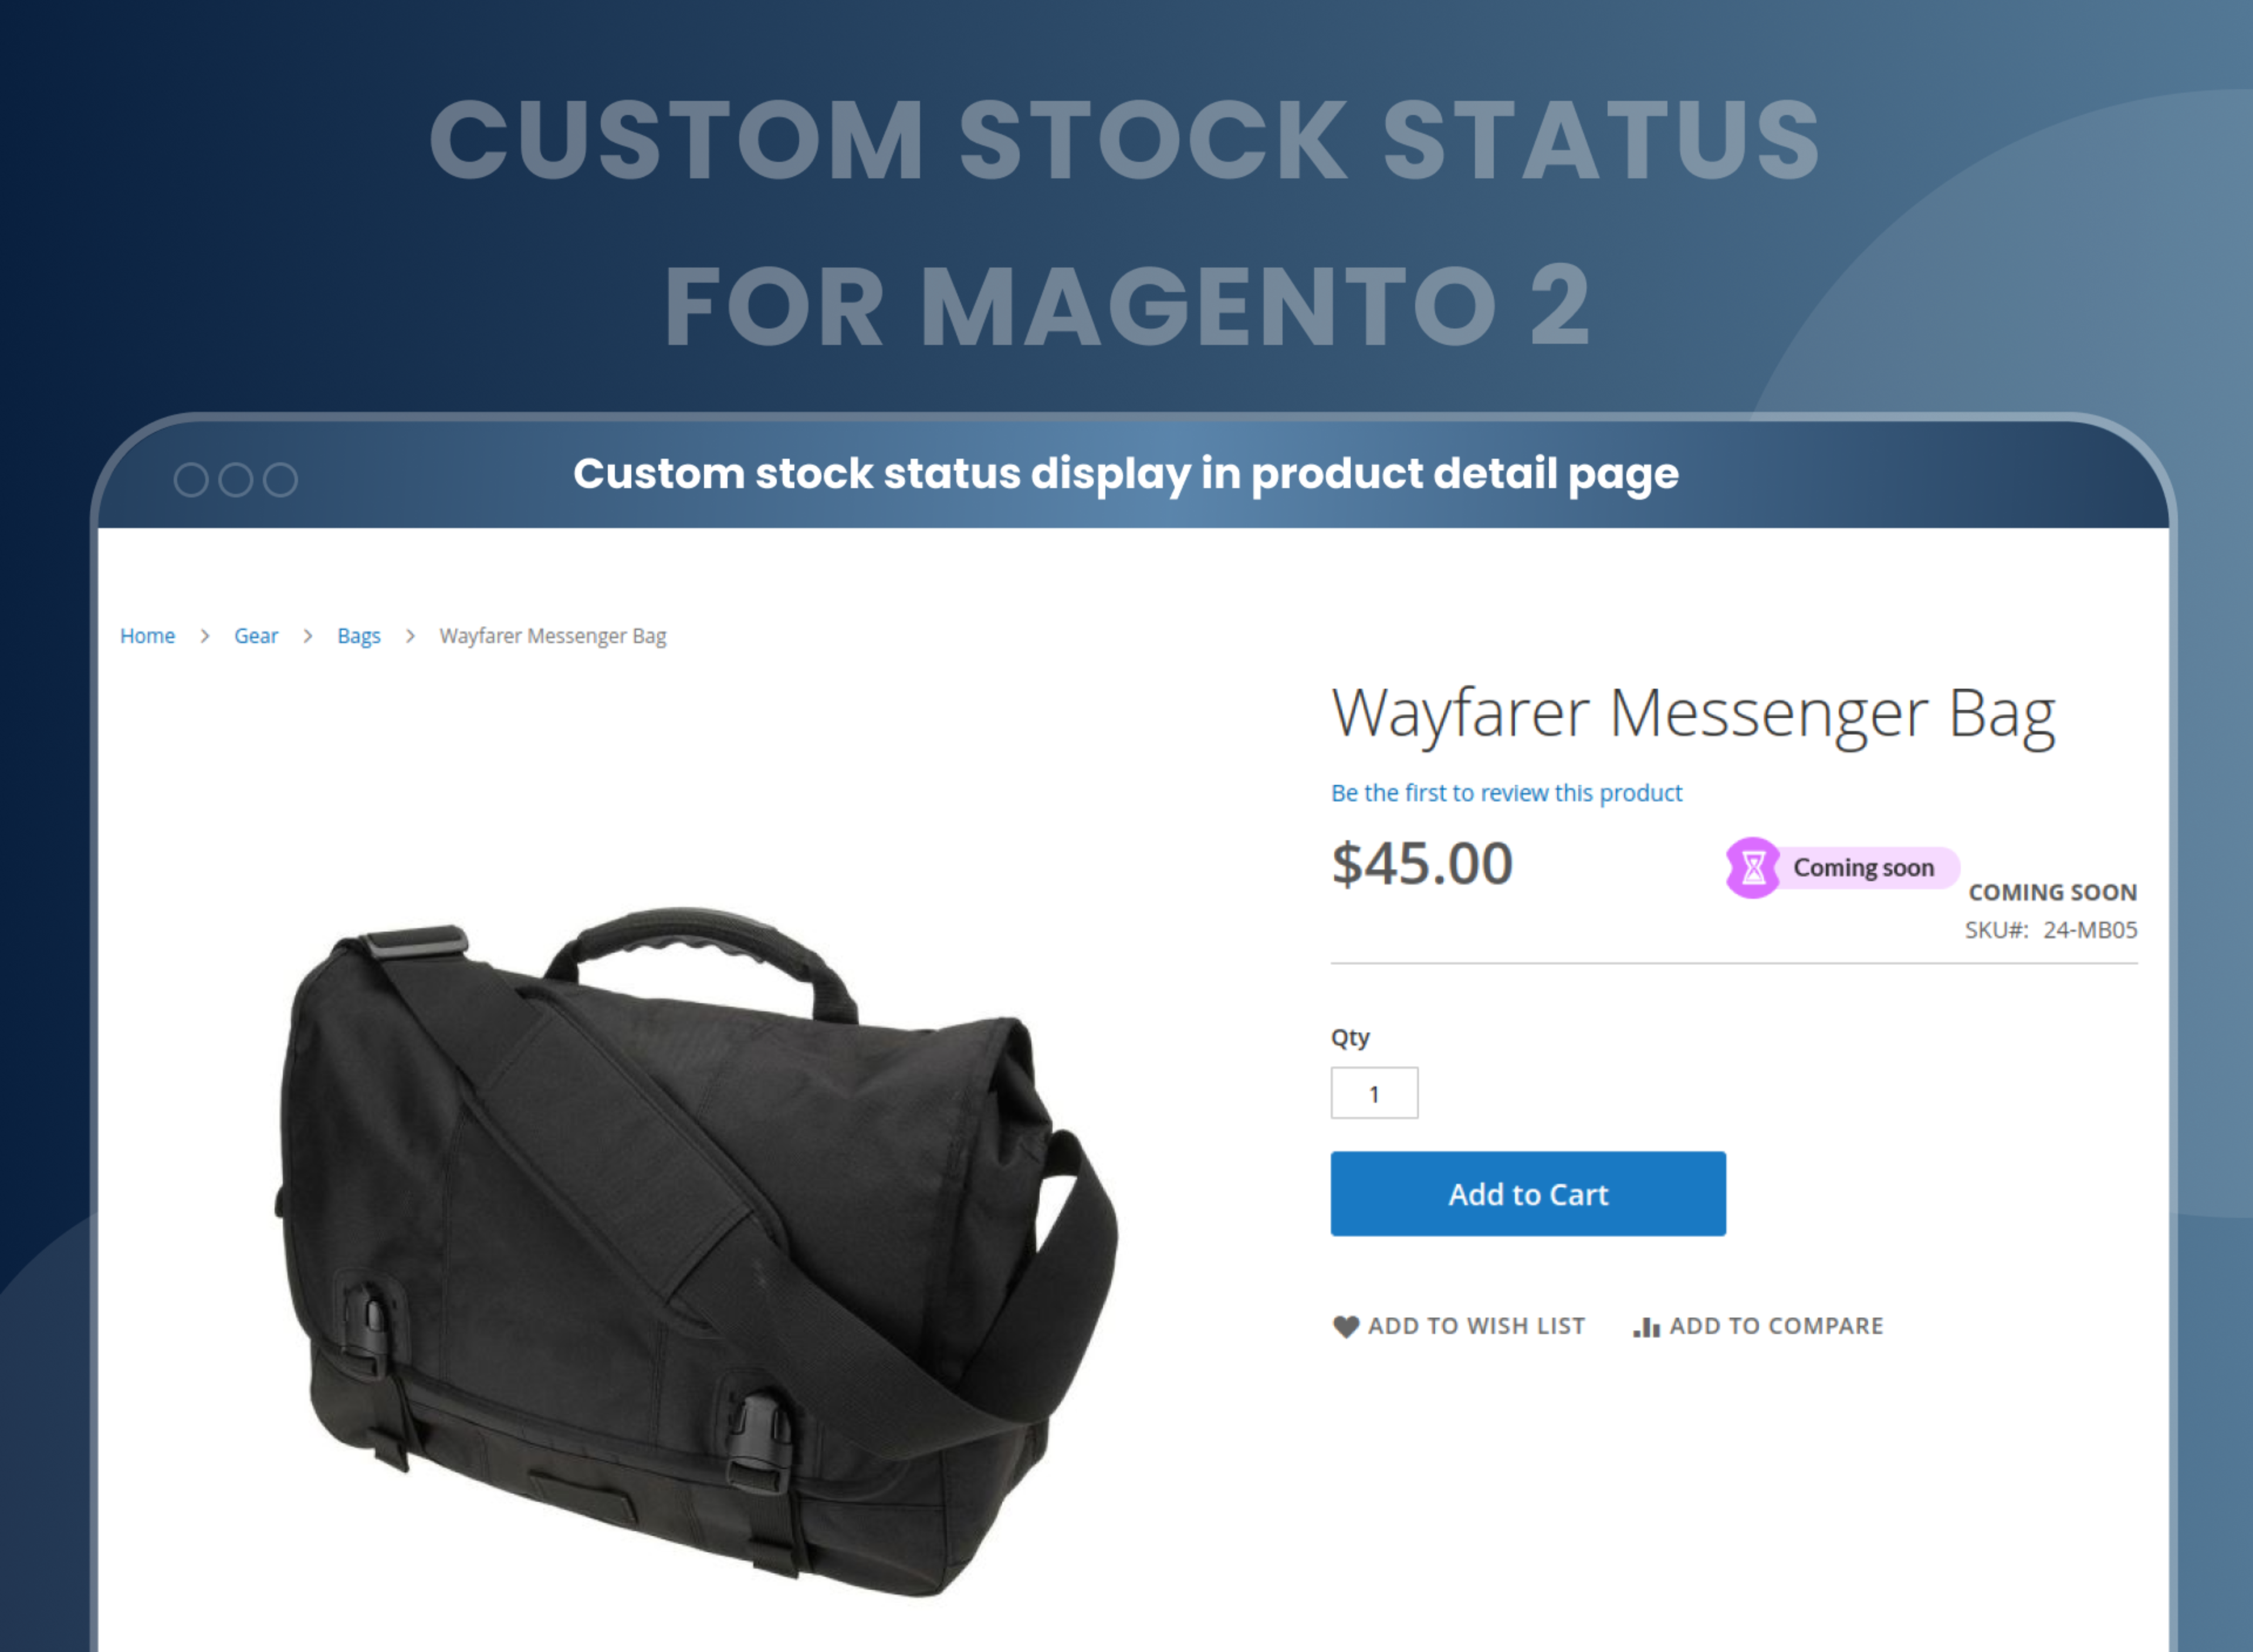 Custom stock status display in product detail page